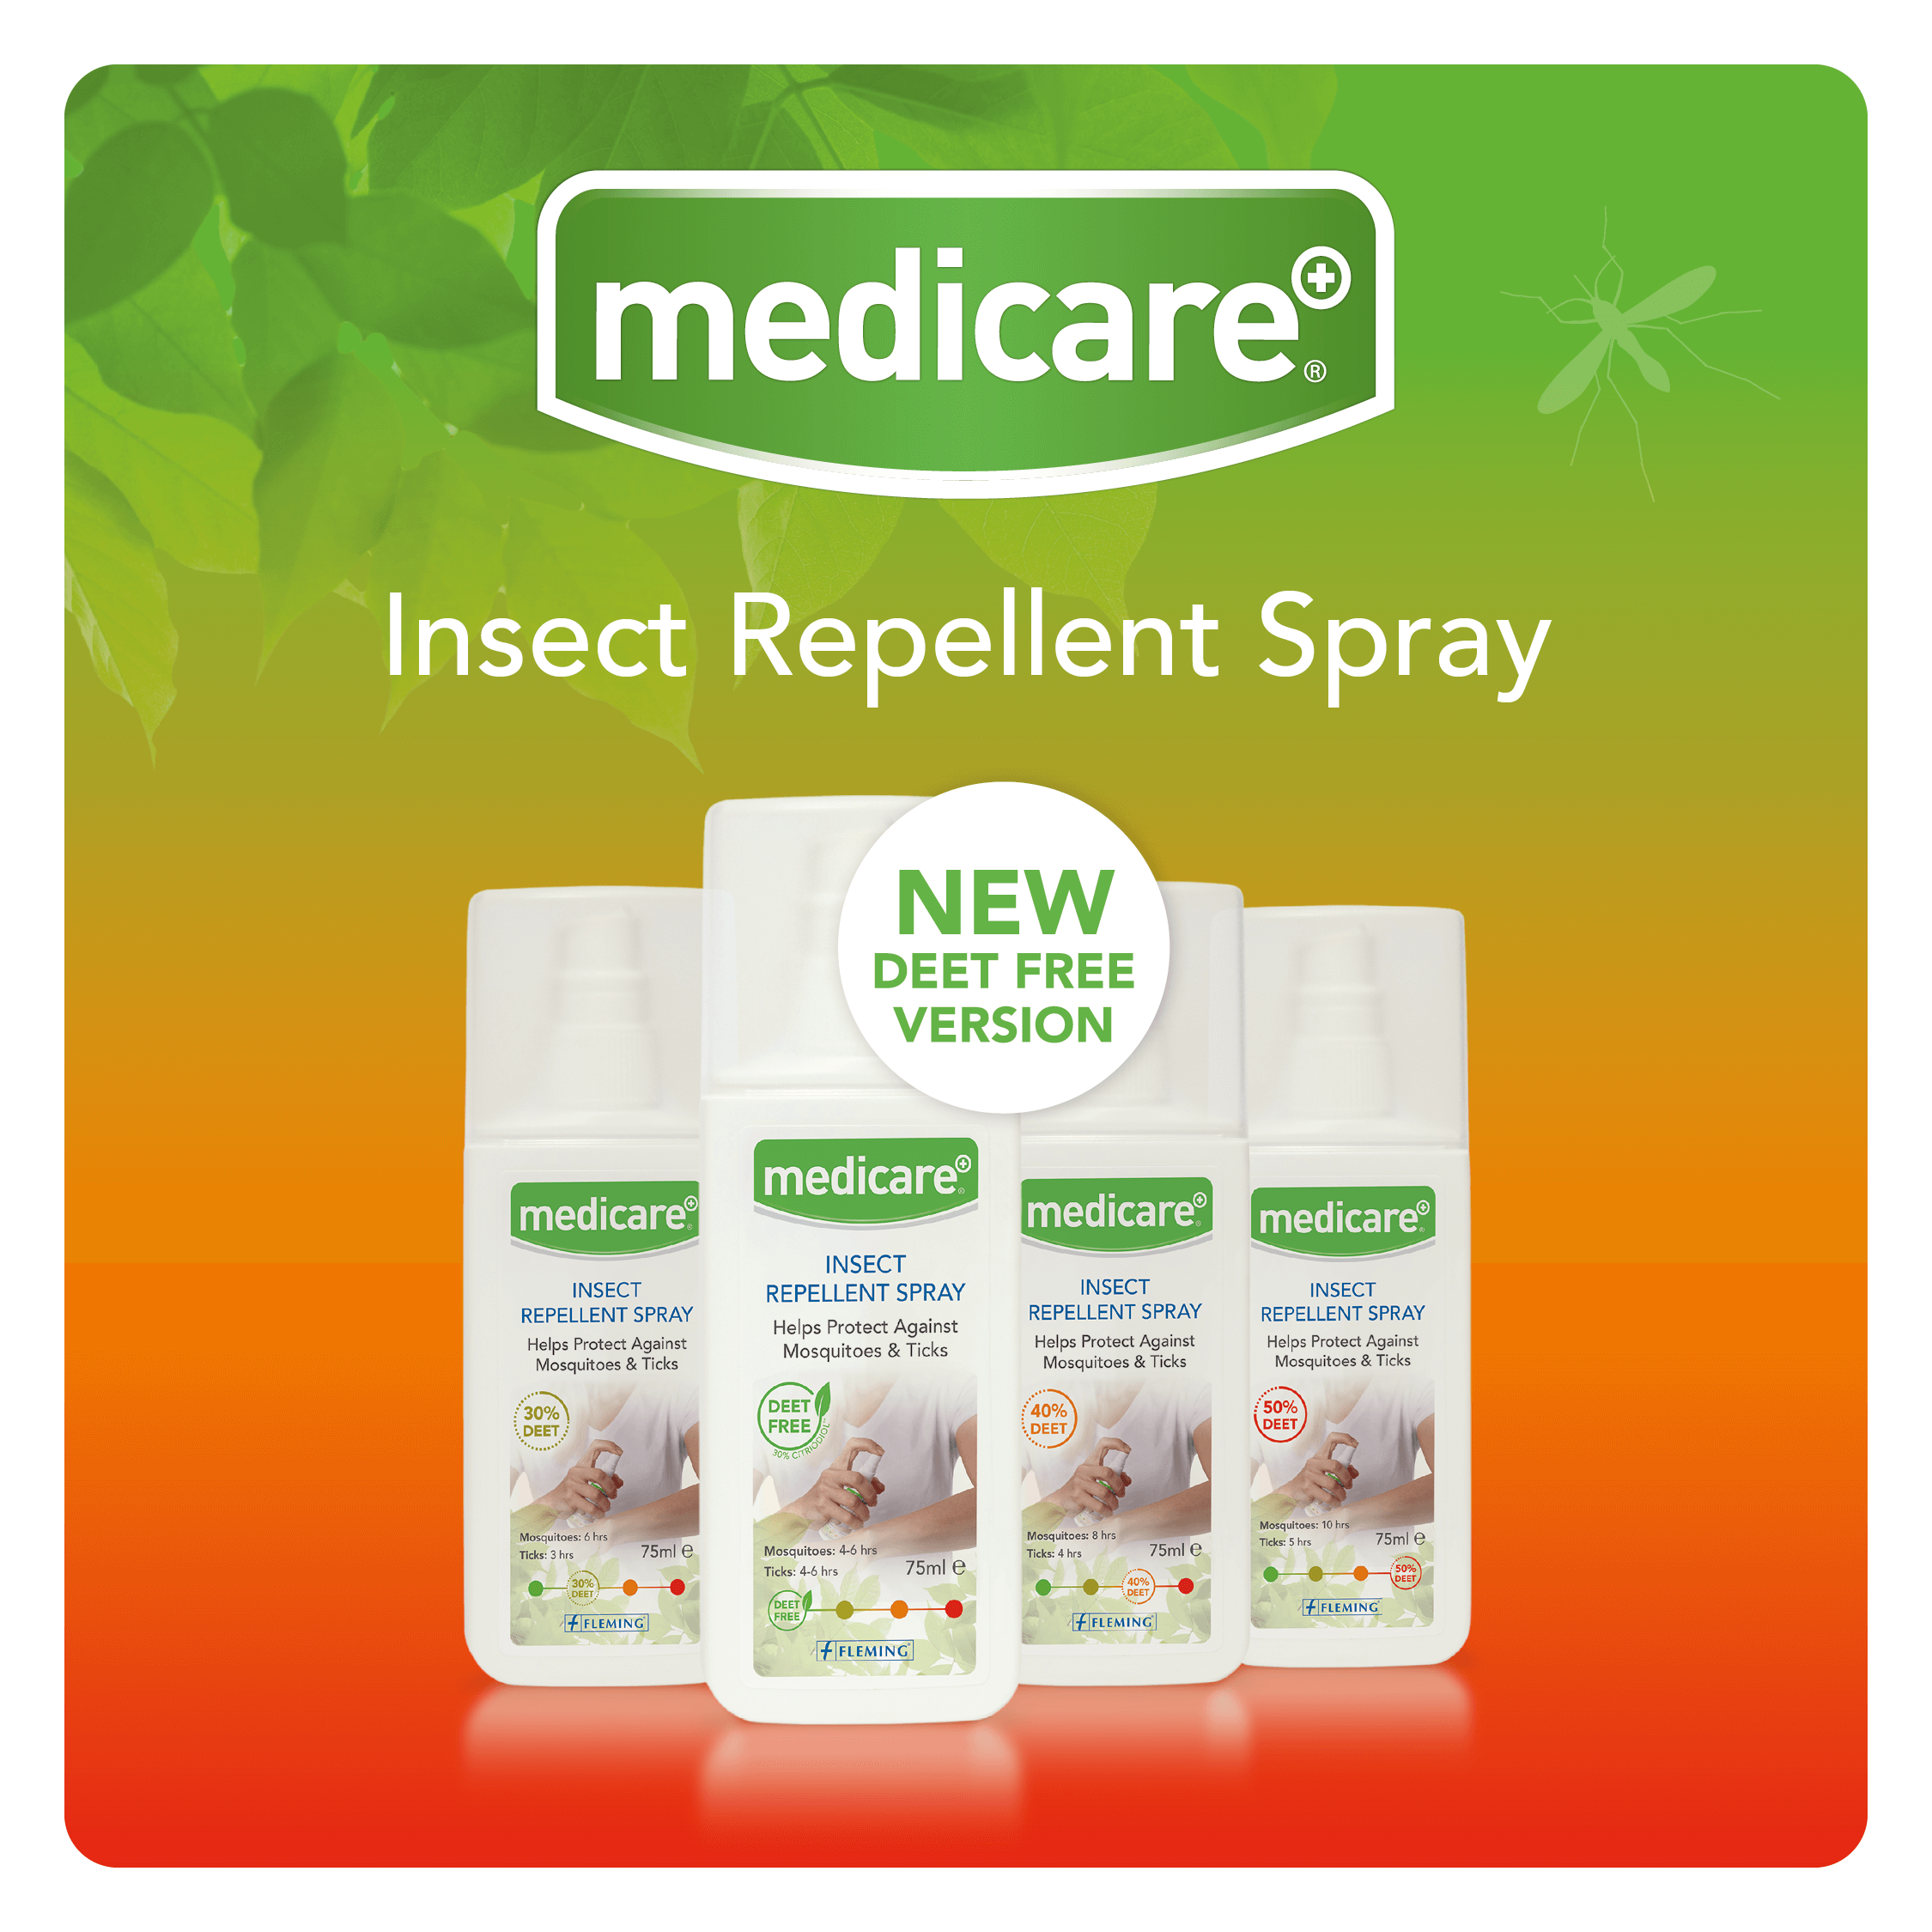 Medicare Insect Repellent